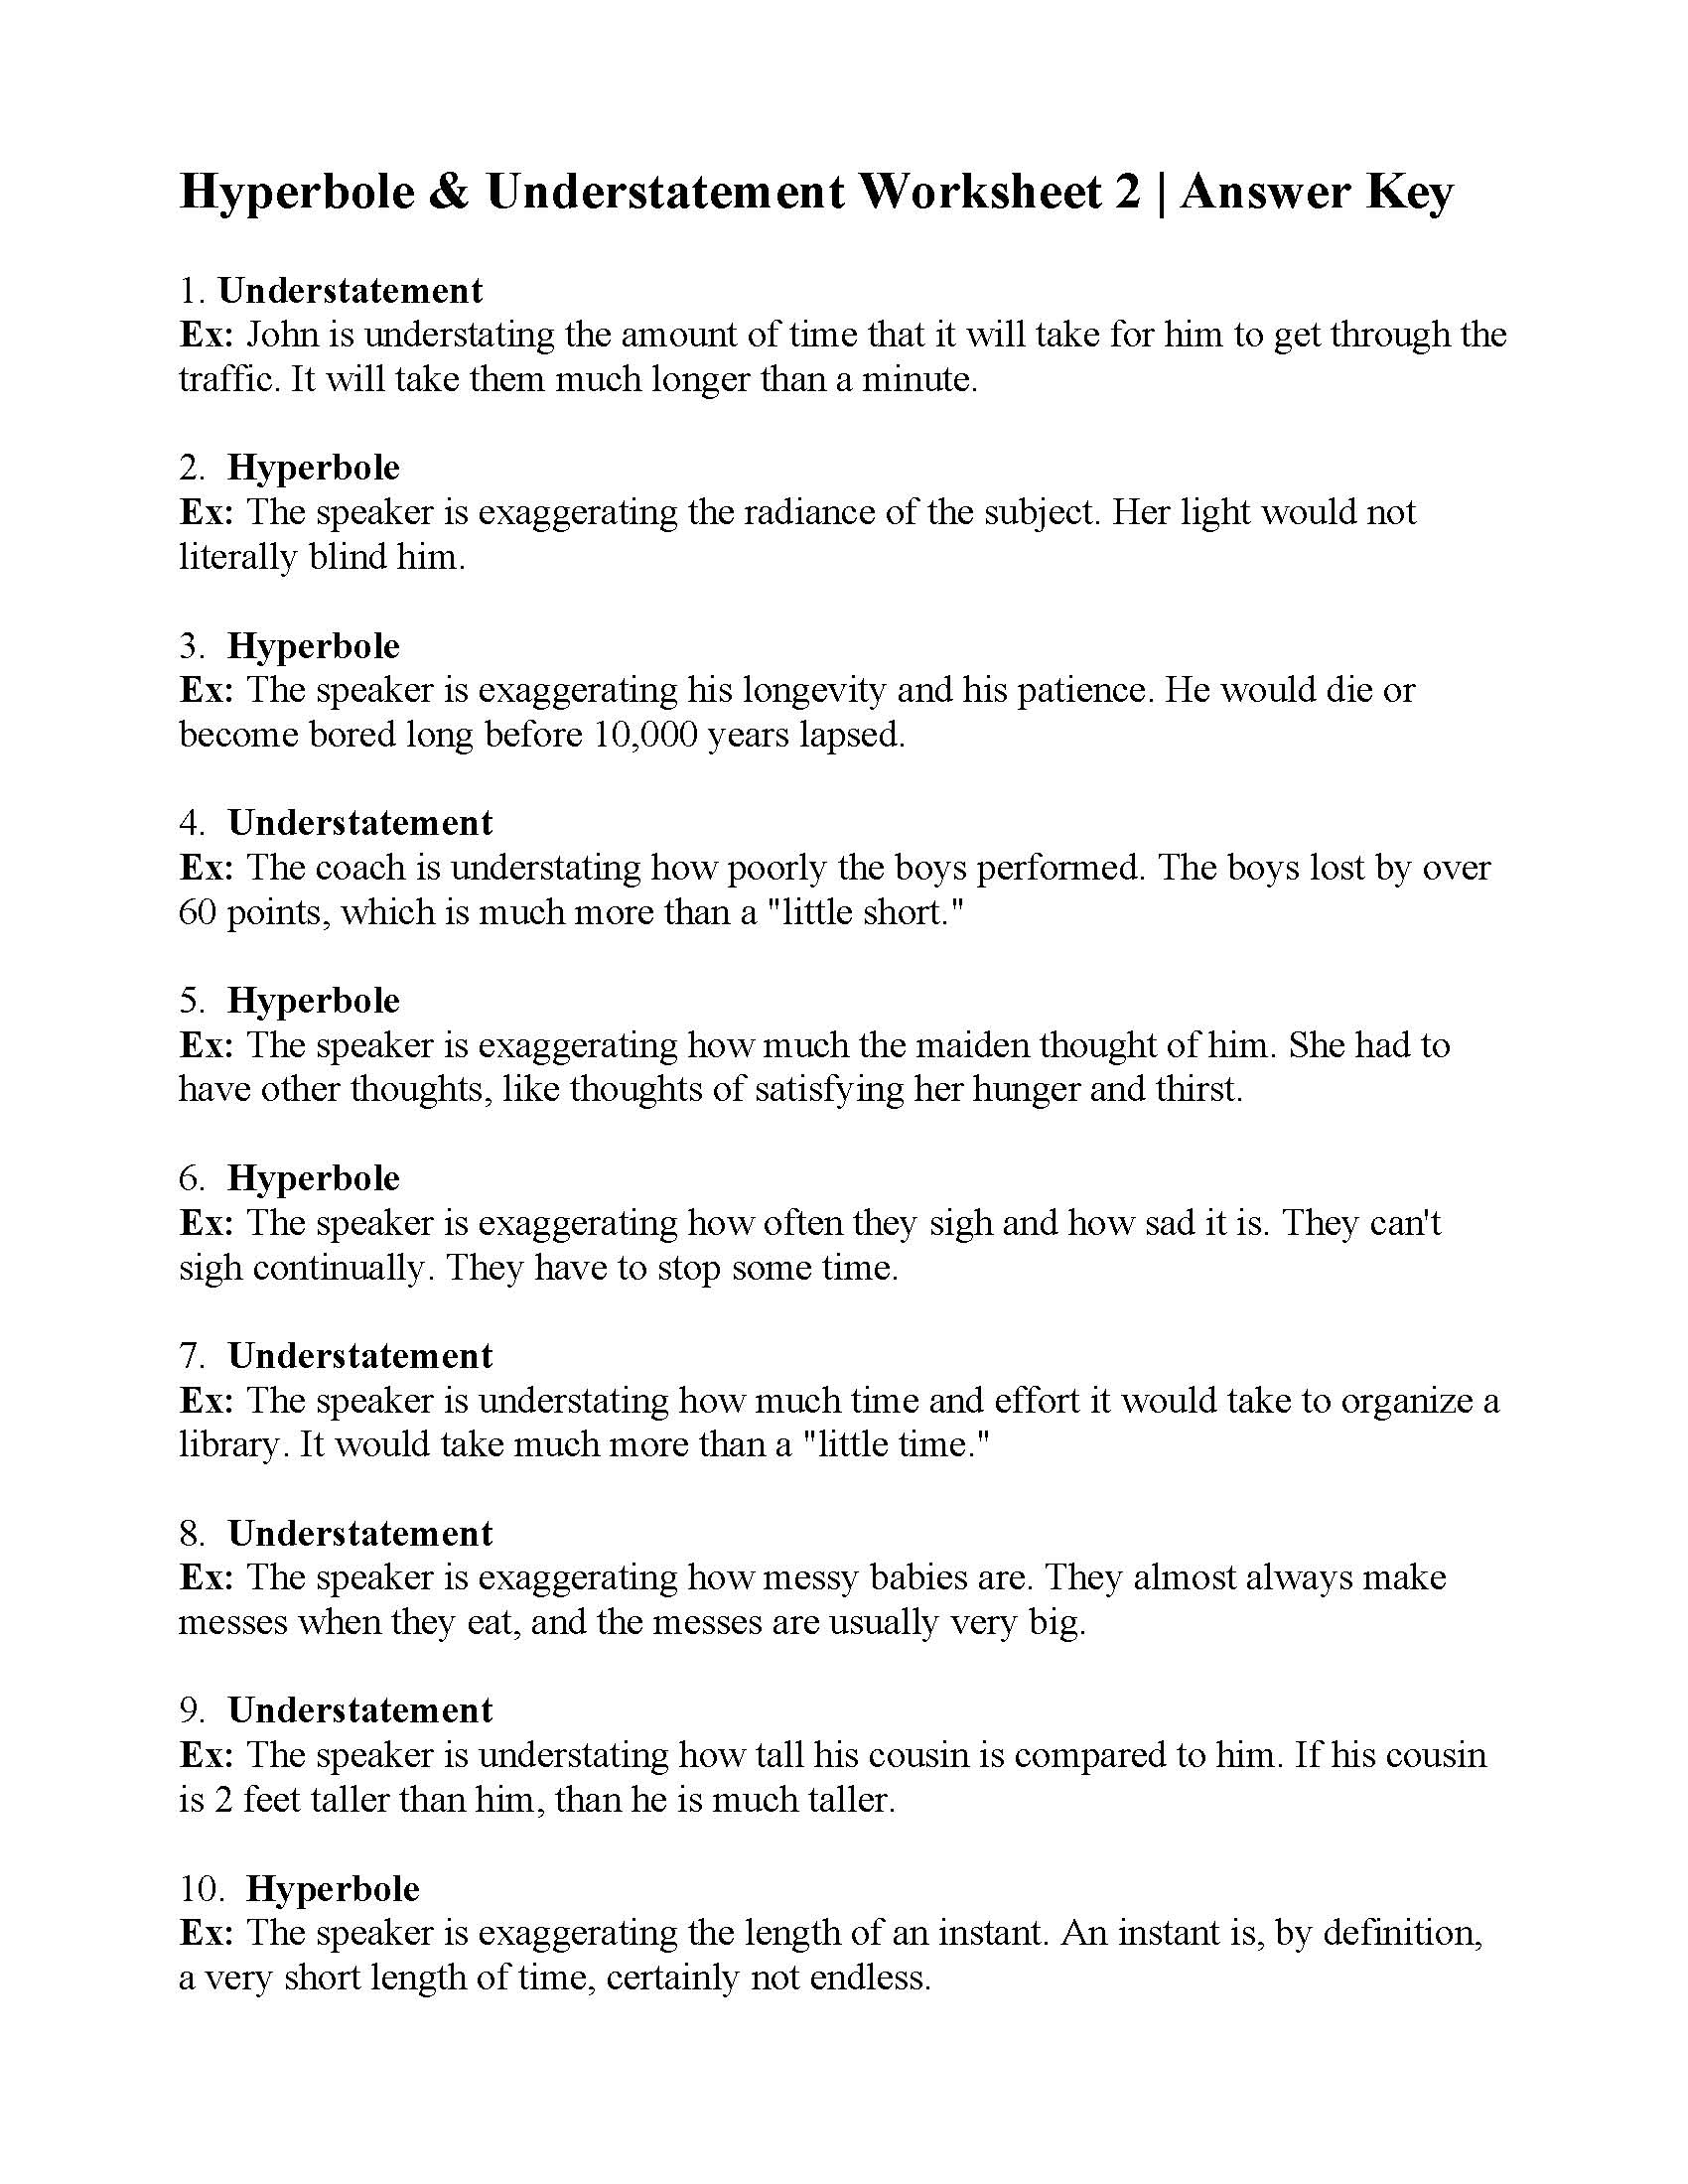 This is a preview image of Hyperbole and Understatement Worksheet 2. Click on it to enlarge it or view the source file.